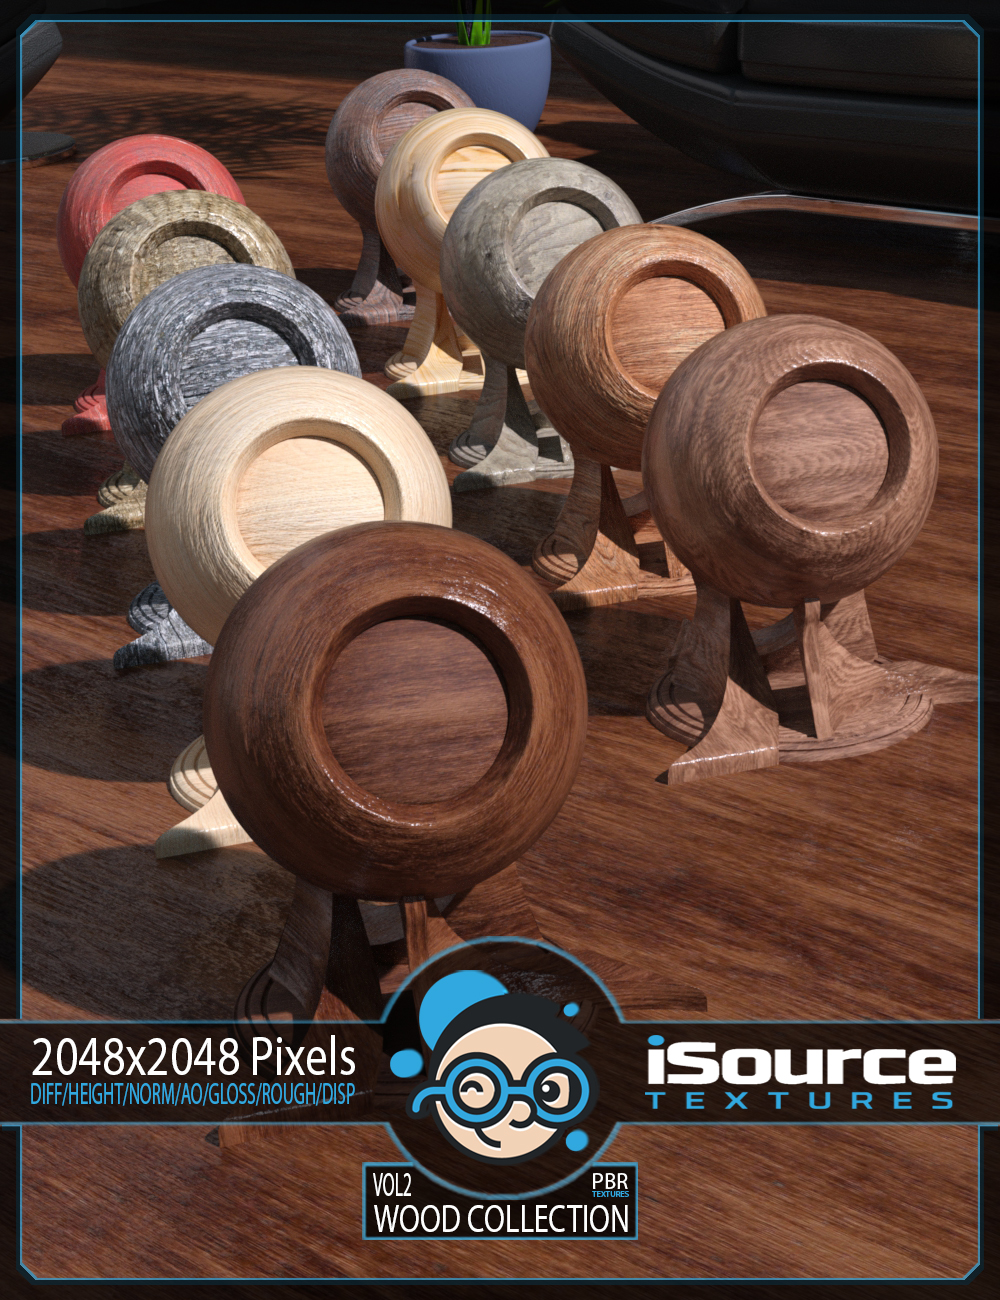 Wood Collection Merchant Resource - Vol2 (PBR Textures) by: iSourceTextures, 3D Models by Daz 3D